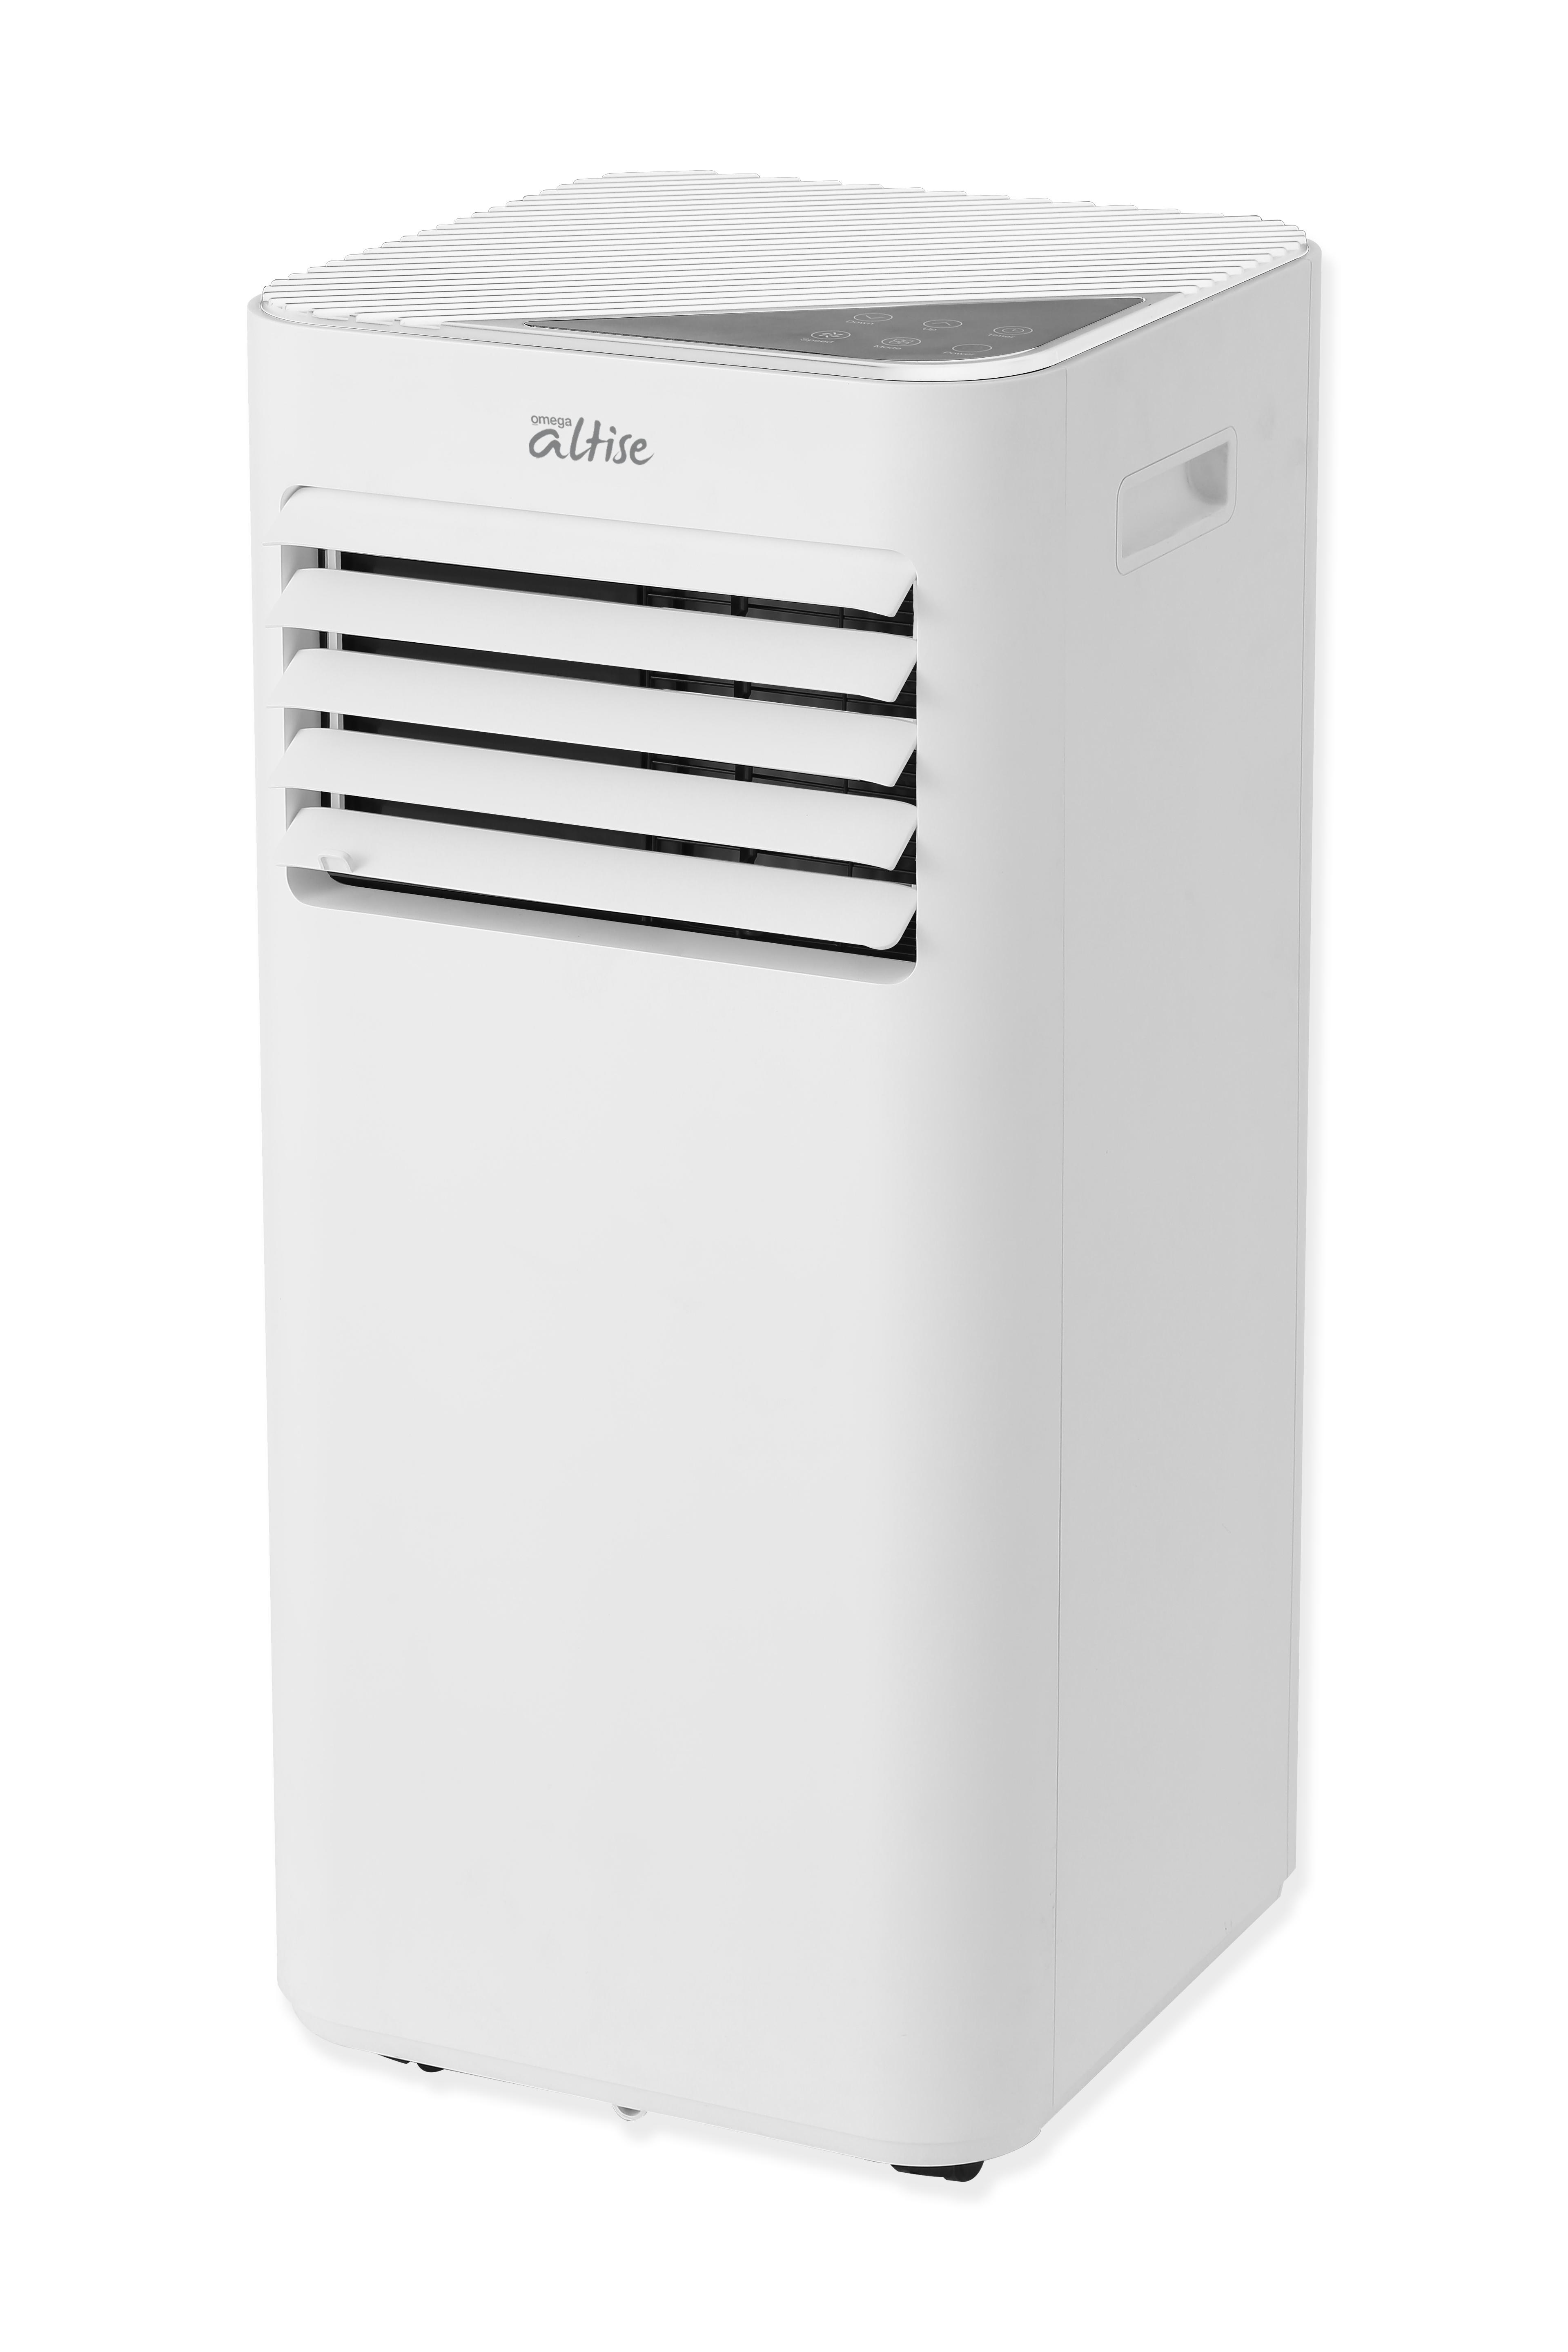 Omega Altise product (2.64kW) Portable Air Conditioner OAPC26W